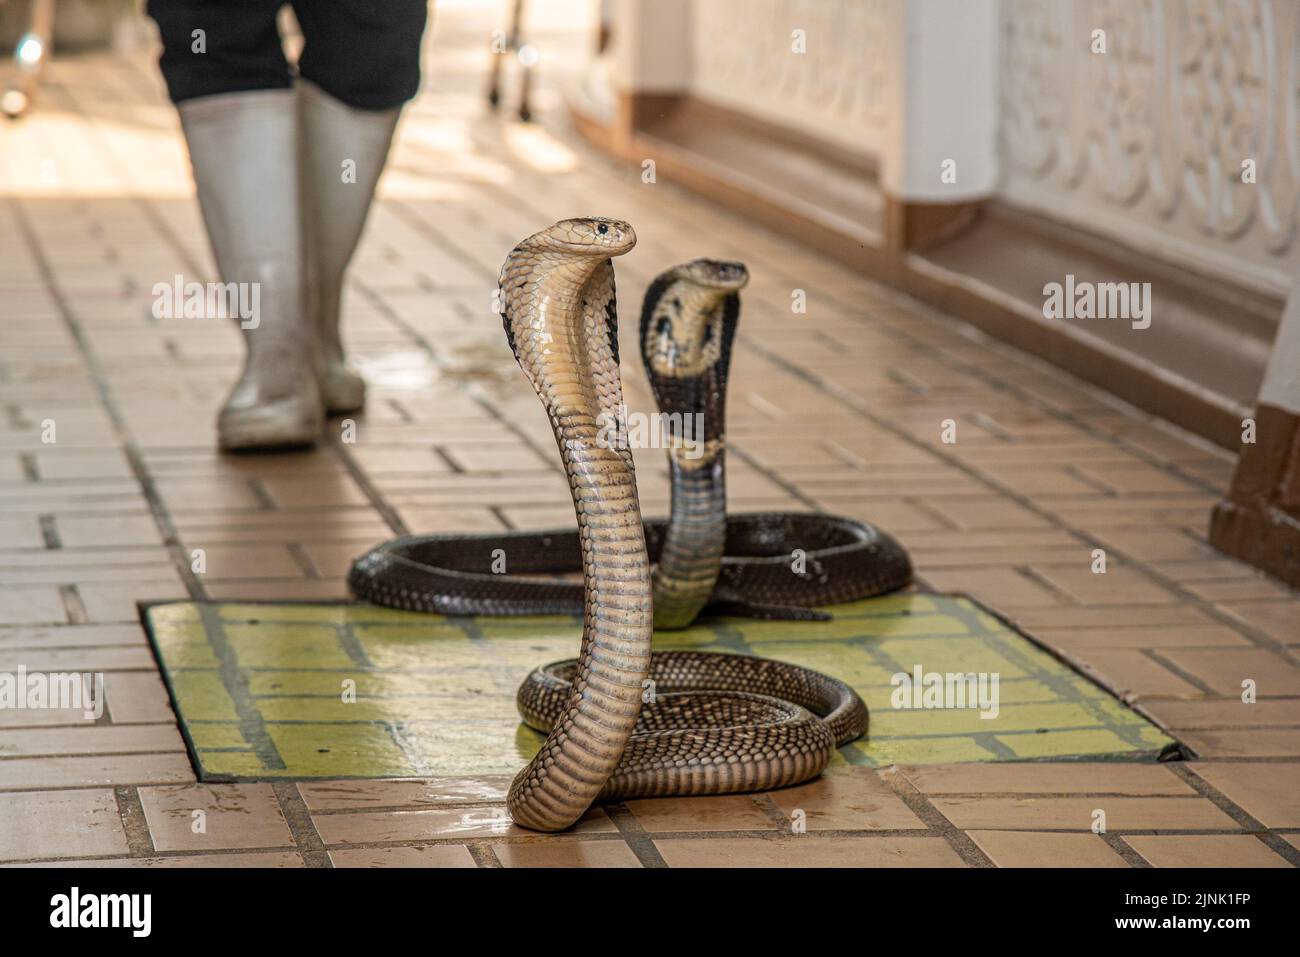 Bangkok, Thailand. 12th Aug, 2022. Siamese Cobra seen during a snake show at the Queen Saovabha Memorial Institute and Snake farm in Bangkok, Thailand. The Queen Saovabha Memorial Institute also known as the Bangkok Snake Farm was founded on 1923 to raised venomous snakes for venom extraction and production of antivenom for Thailand and surrounding regions where venomous snakes are endemic. The institute also serves as a museum to inform the general public about snakes in Thailand. Credit: SOPA Images Limited/Alamy Live News Stock Photo